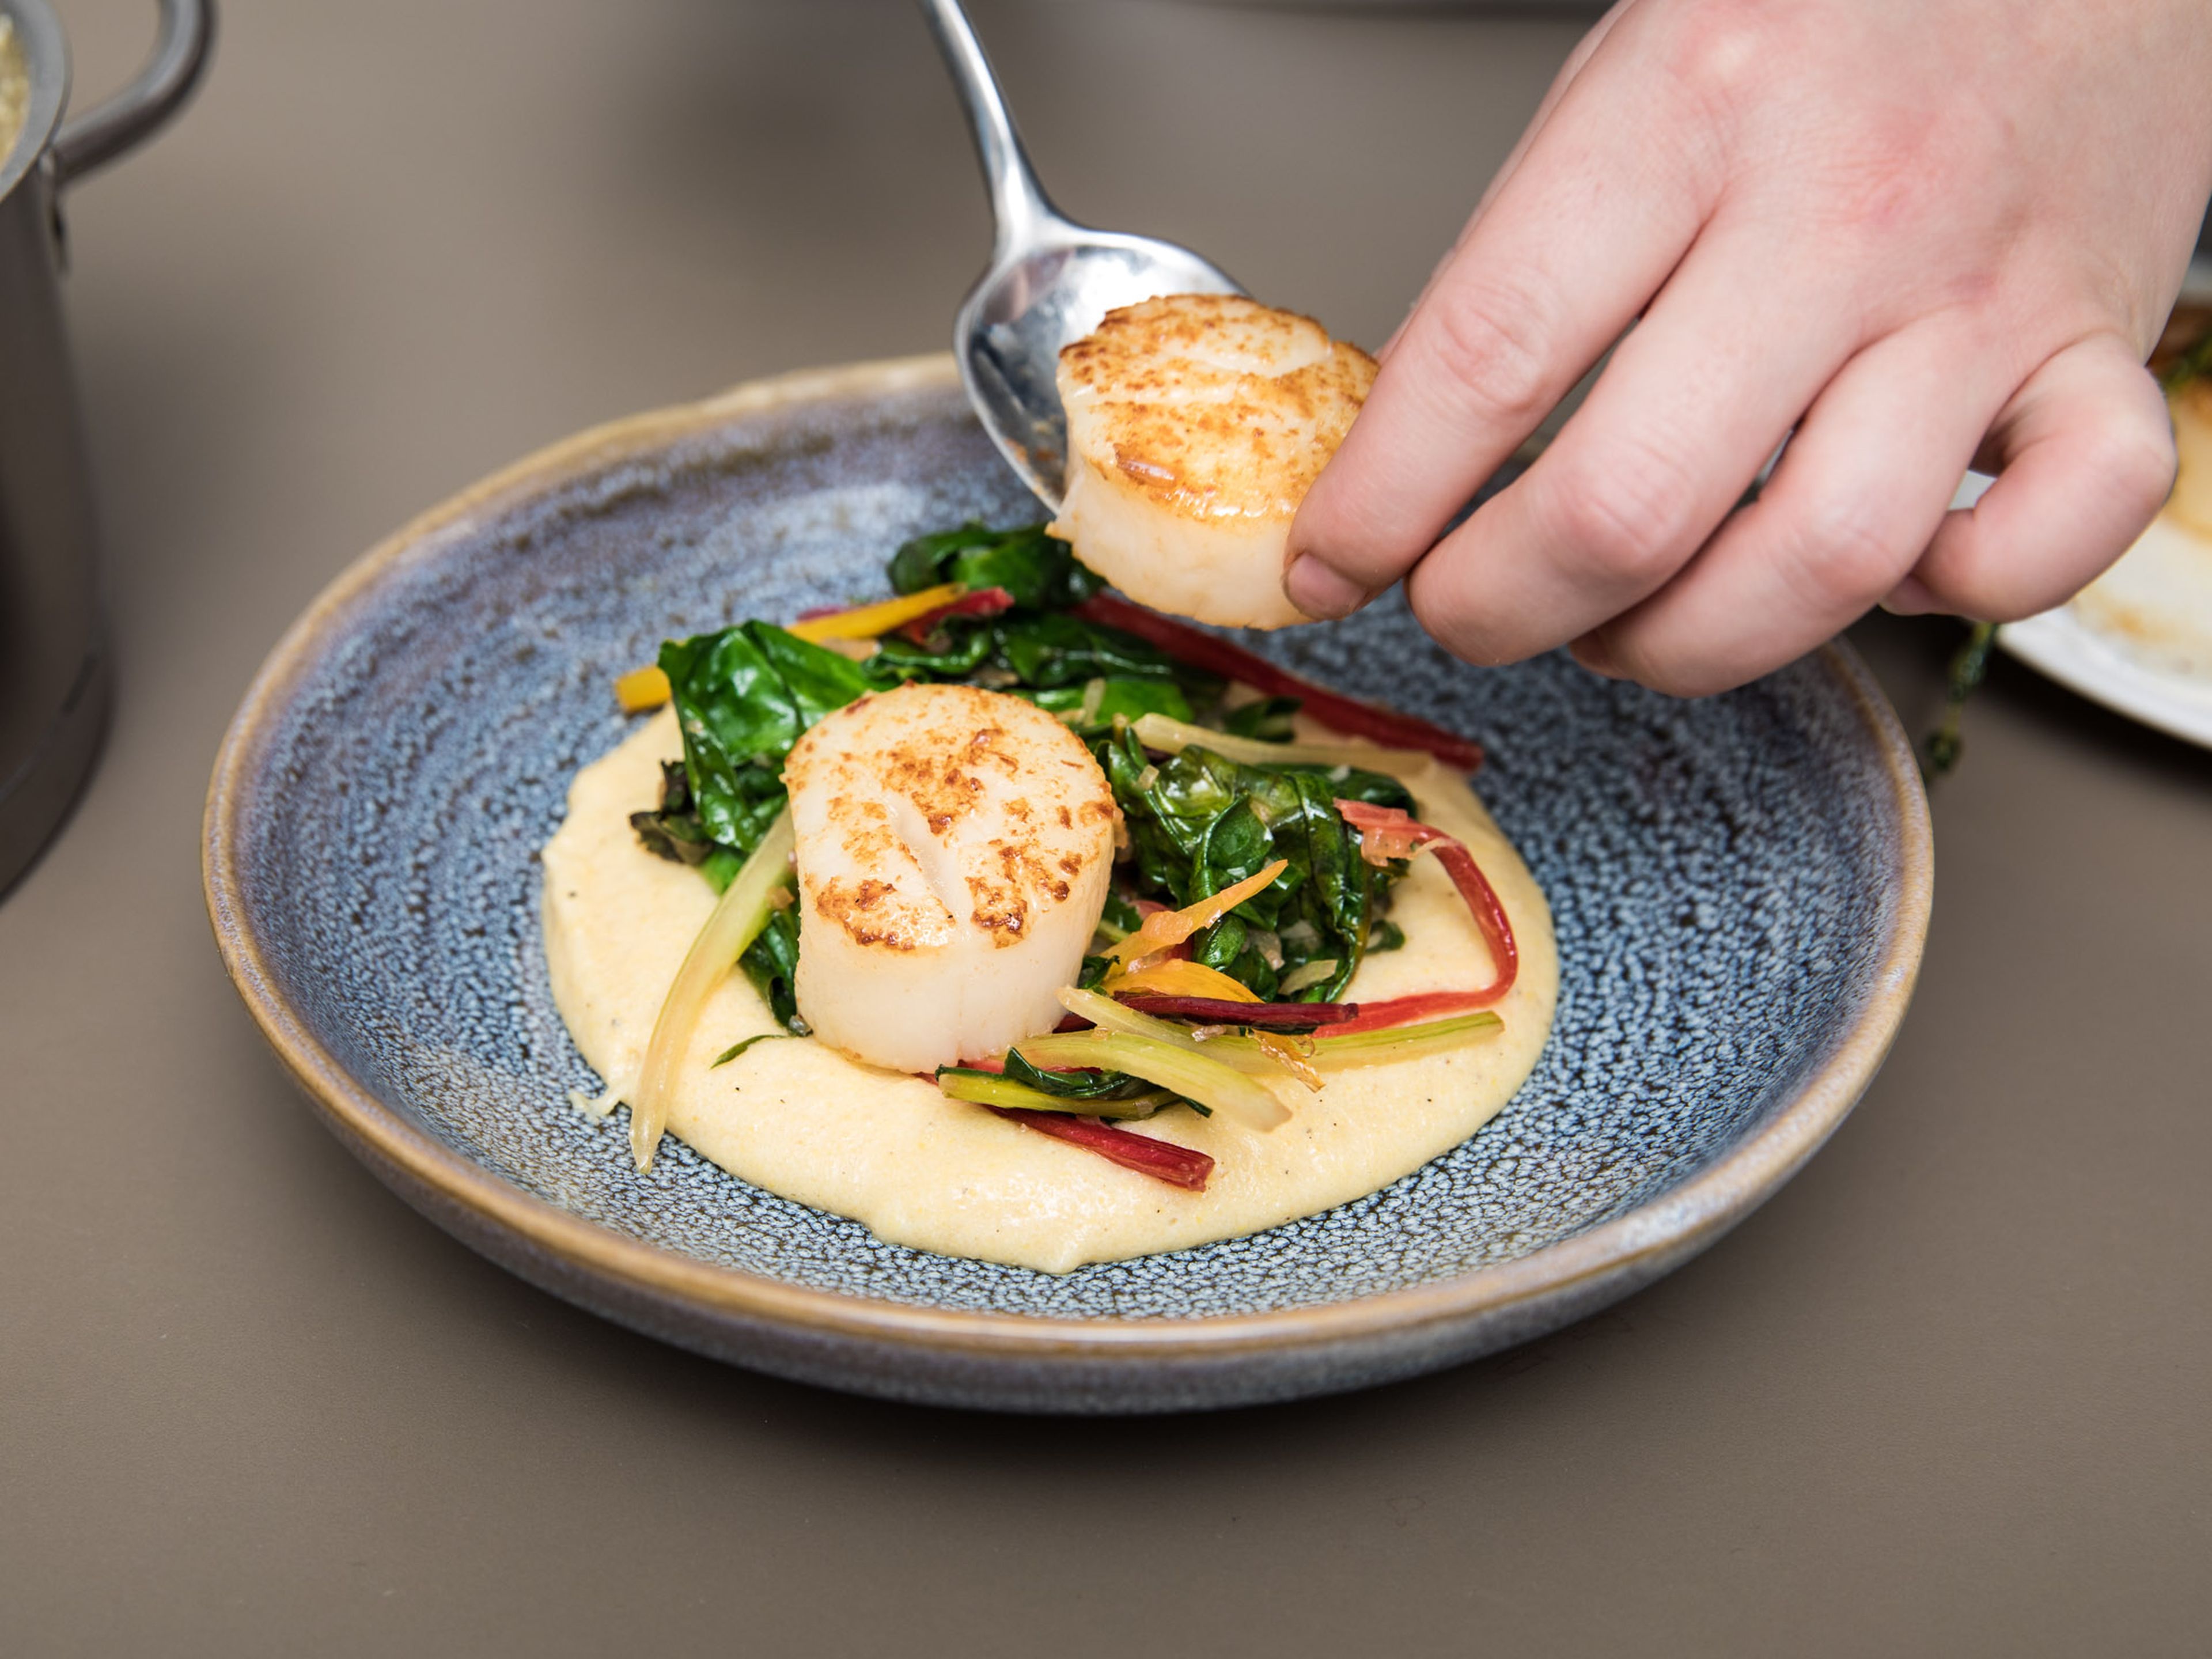 Serve polenta with Swiss chard and scallops on top. Enjoy!